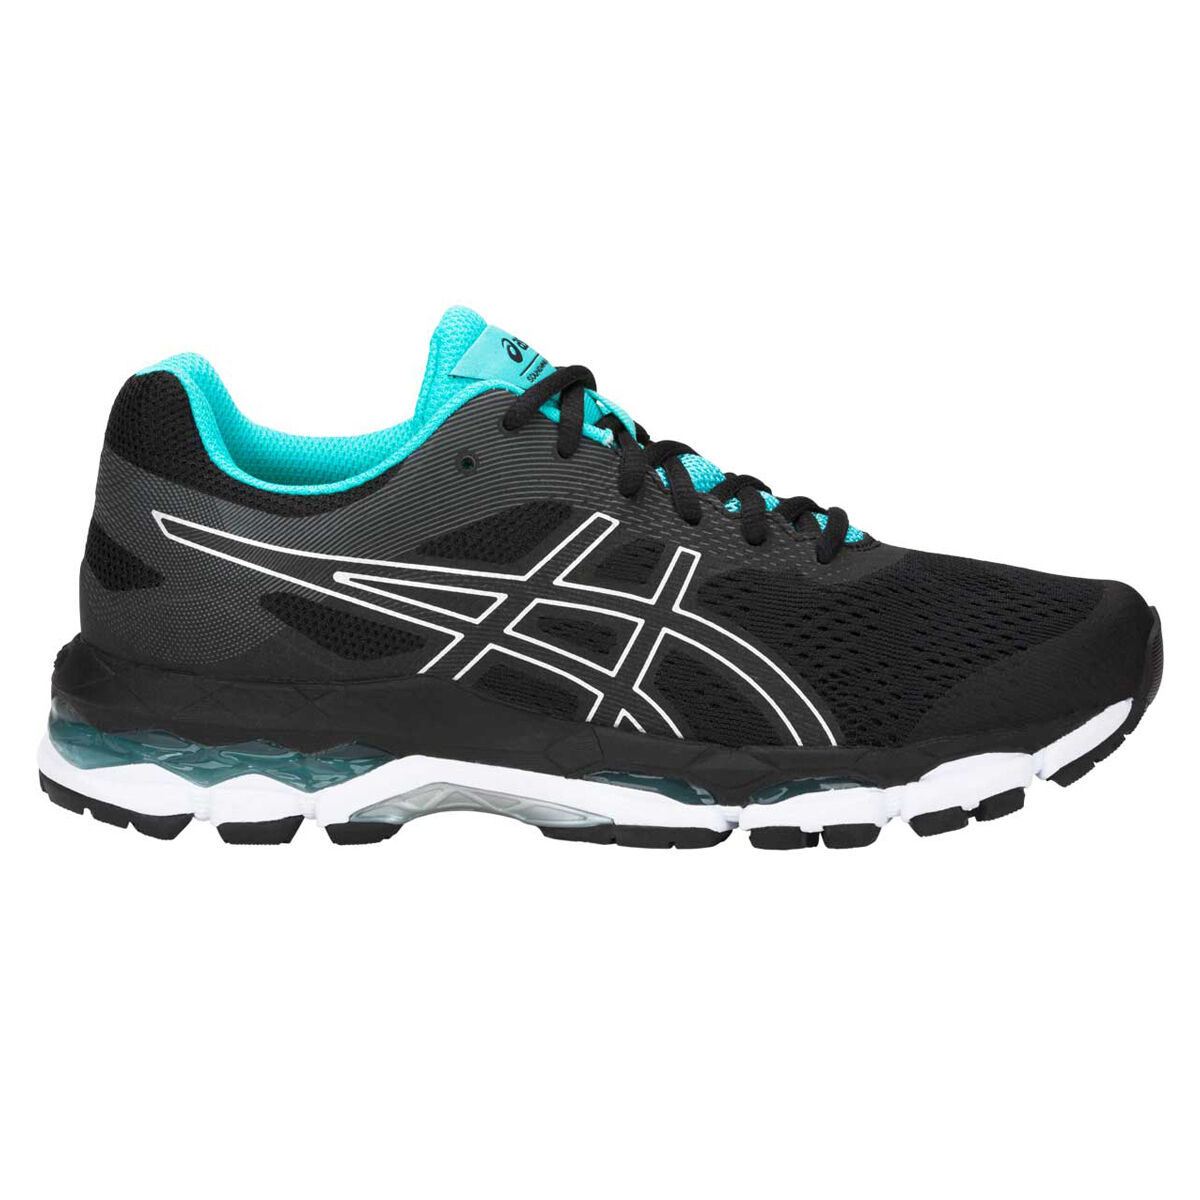 asics gel superion review